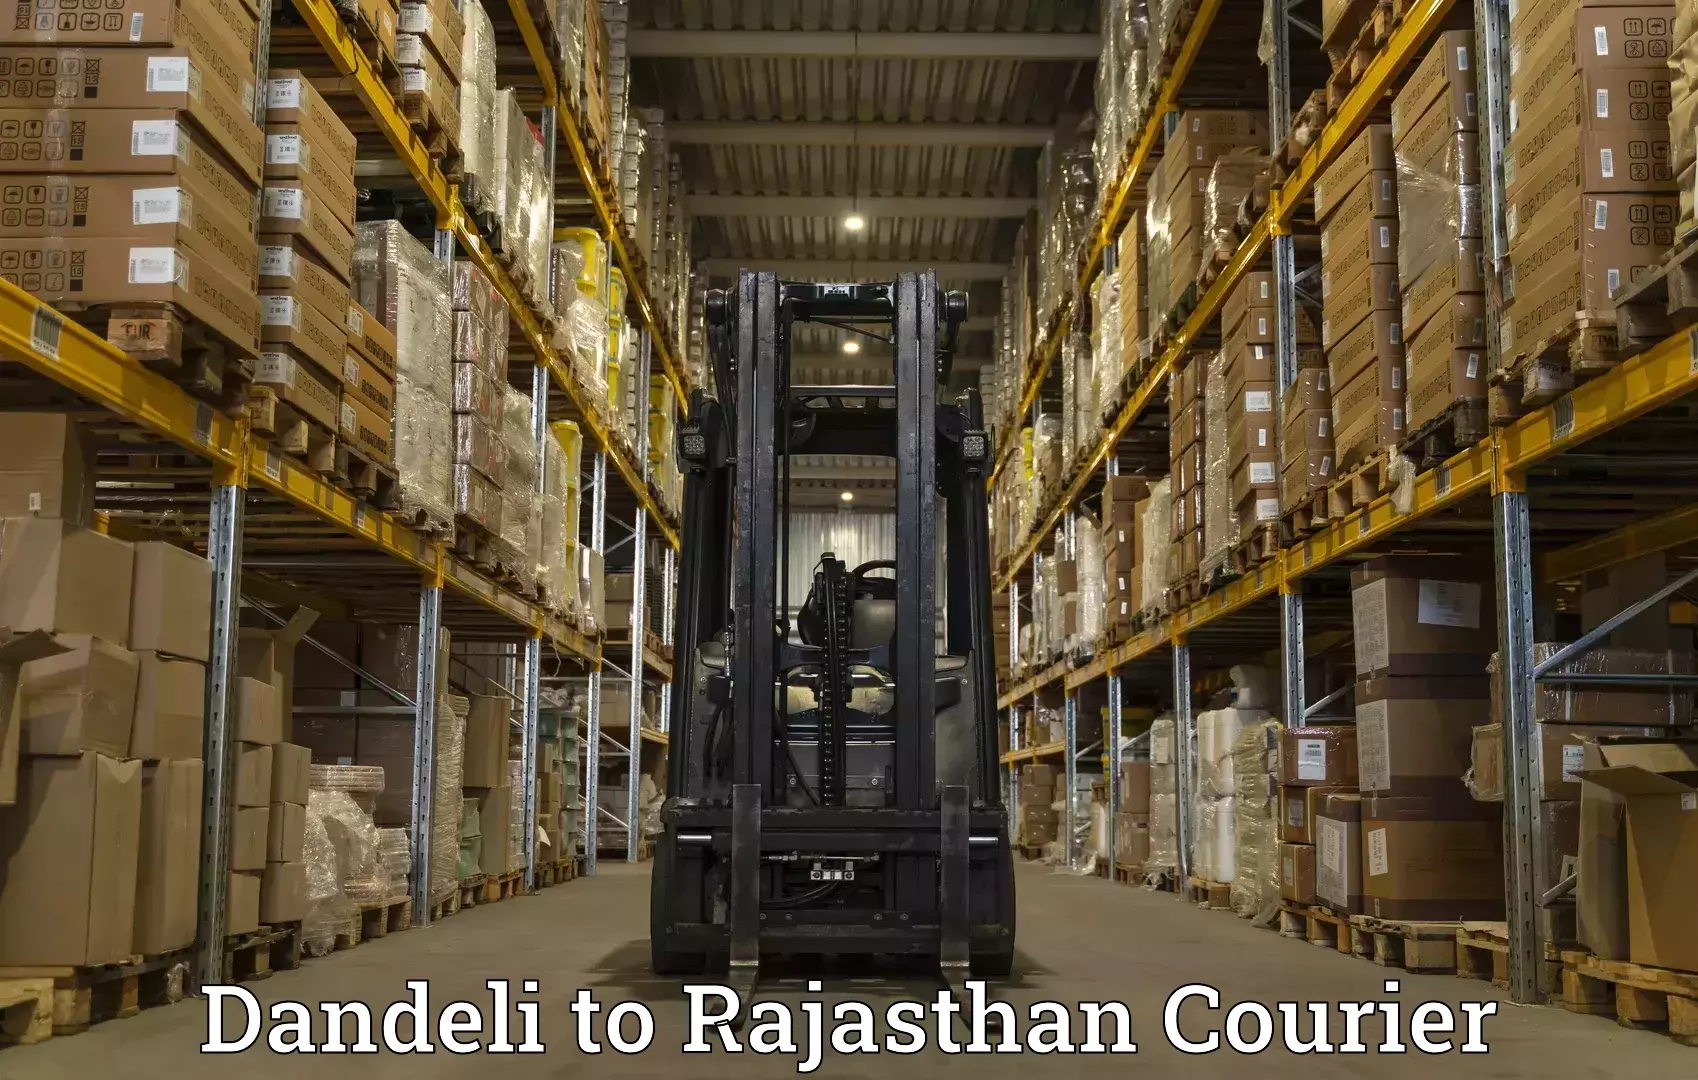 Customized shipping options Dandeli to Rajasthan